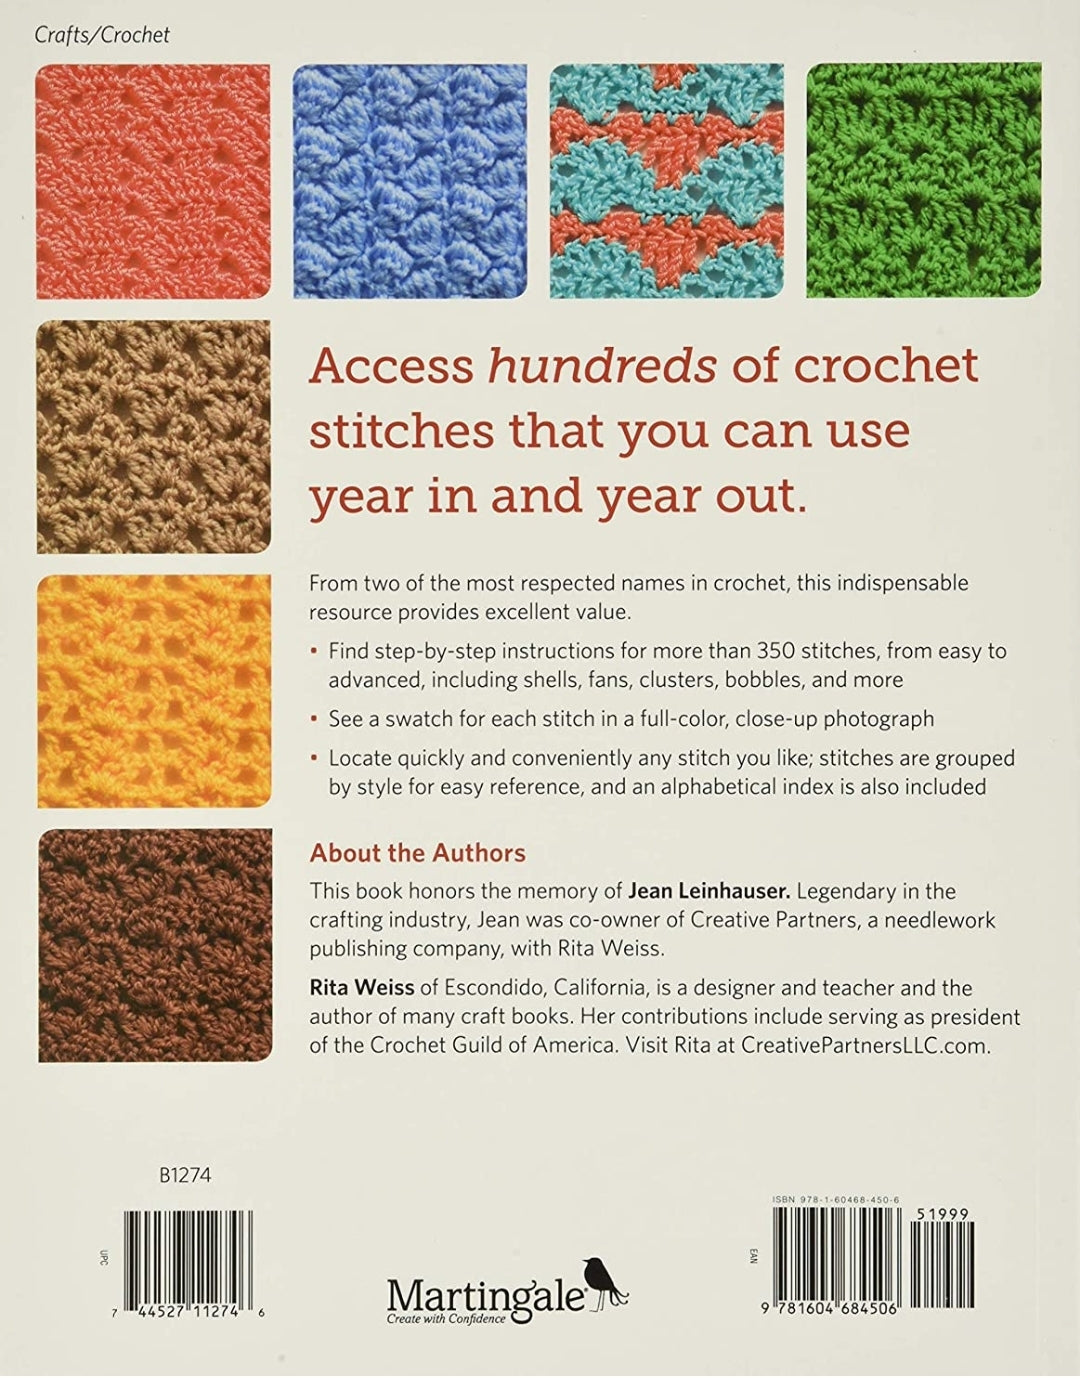 Rita Weiss - The Big Book of Crochet Stitches: Fabulous Fans, Pretty Picots, Clever Clusters, Lots More!